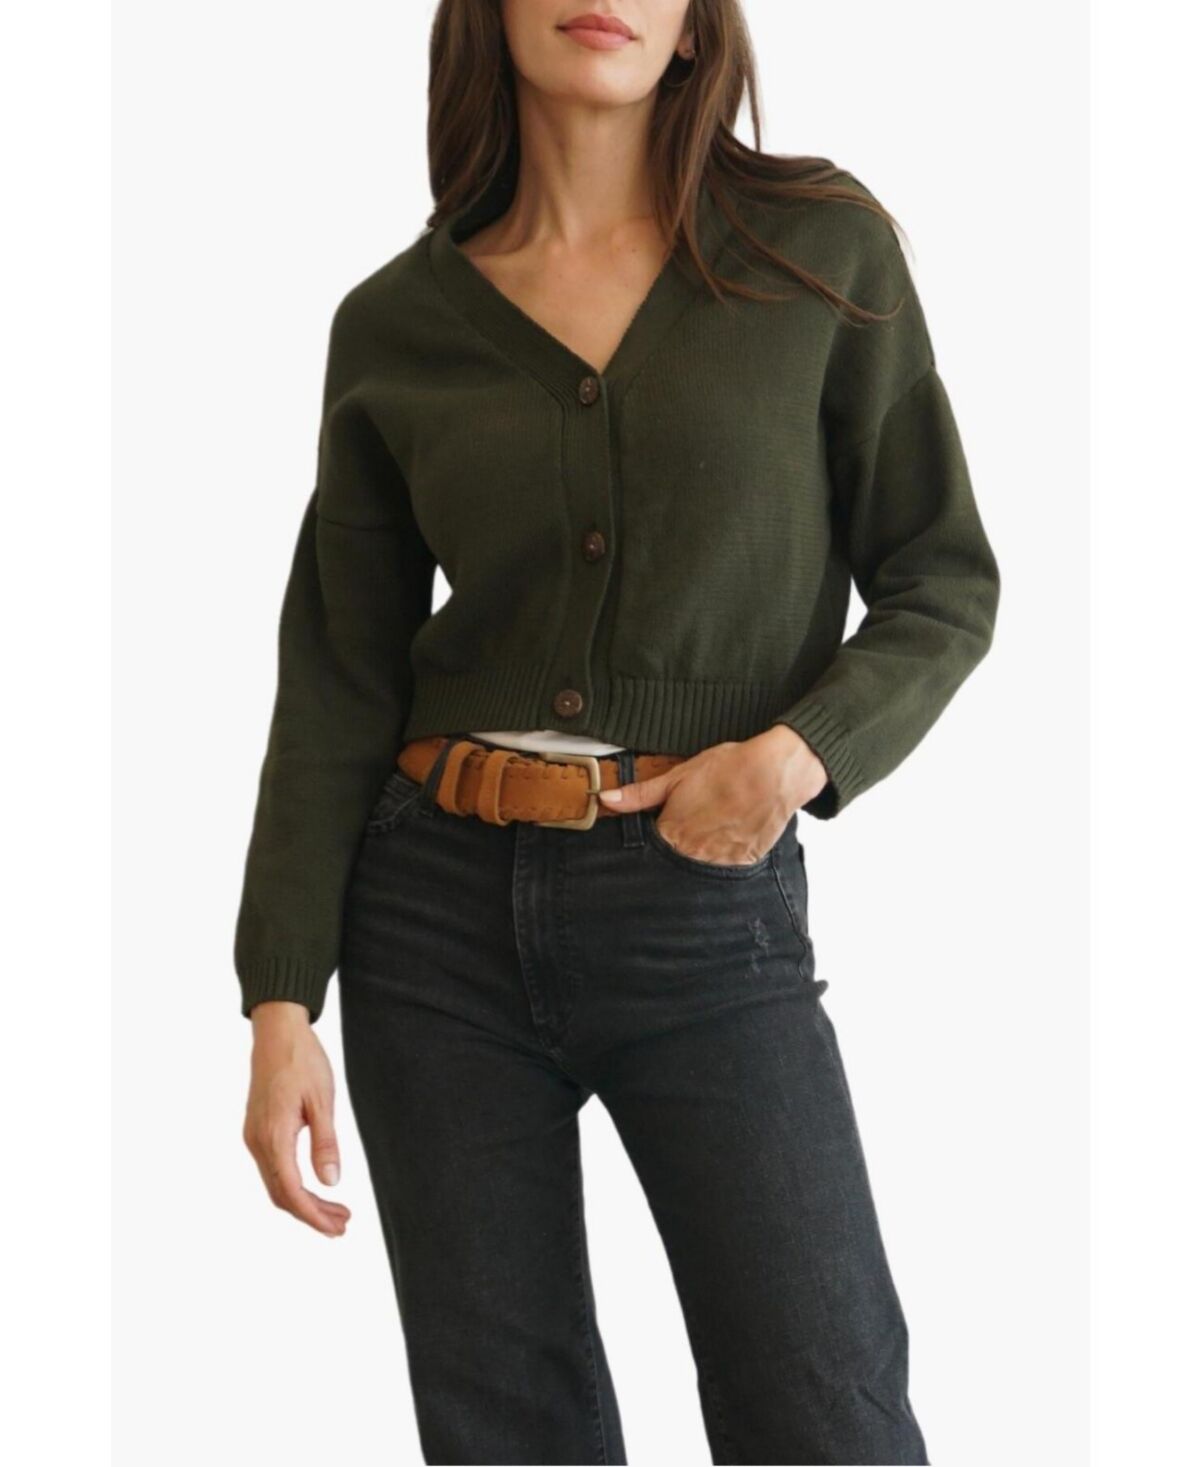 Paneros Clothing Women's Cotton Diana Crop Cardigan Sweater - Forest green